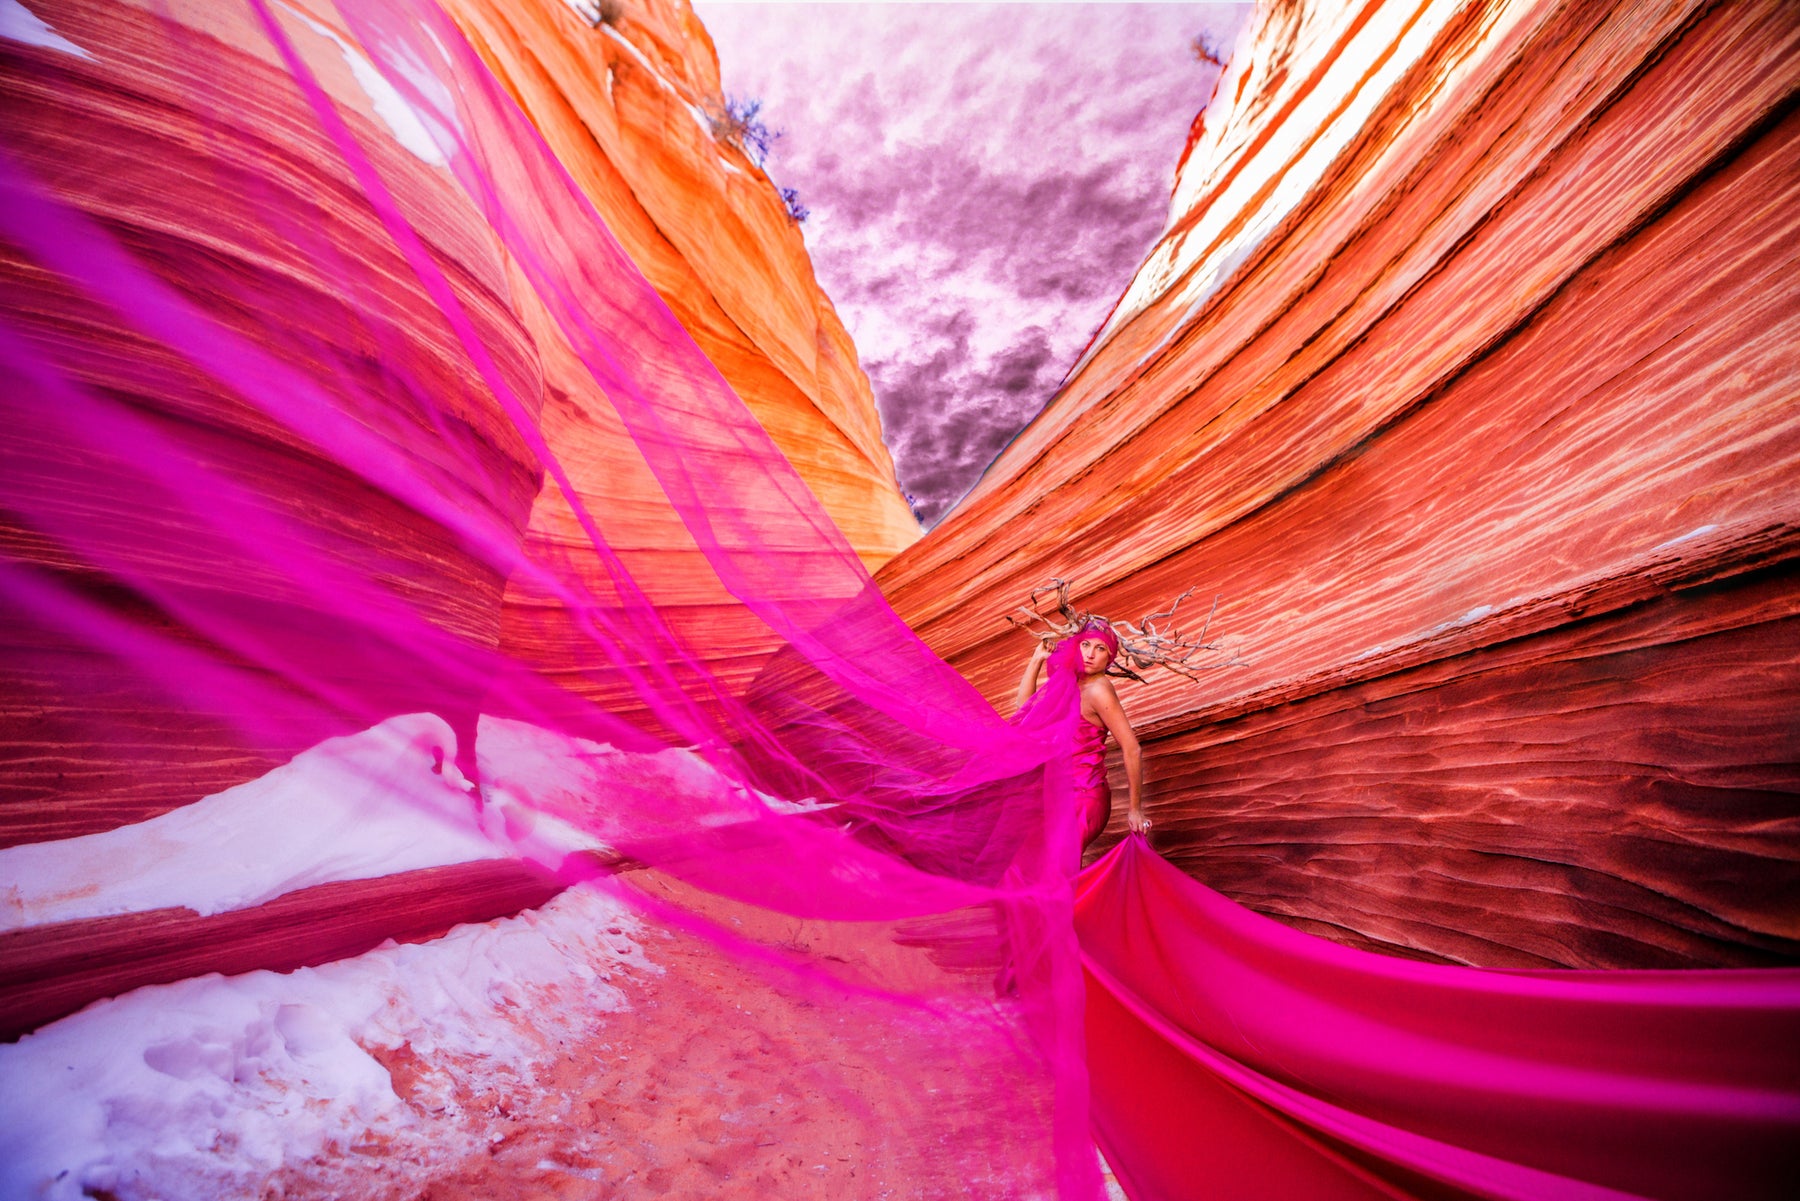 Terra Pink at Coyote Buttes - Global Goddesses